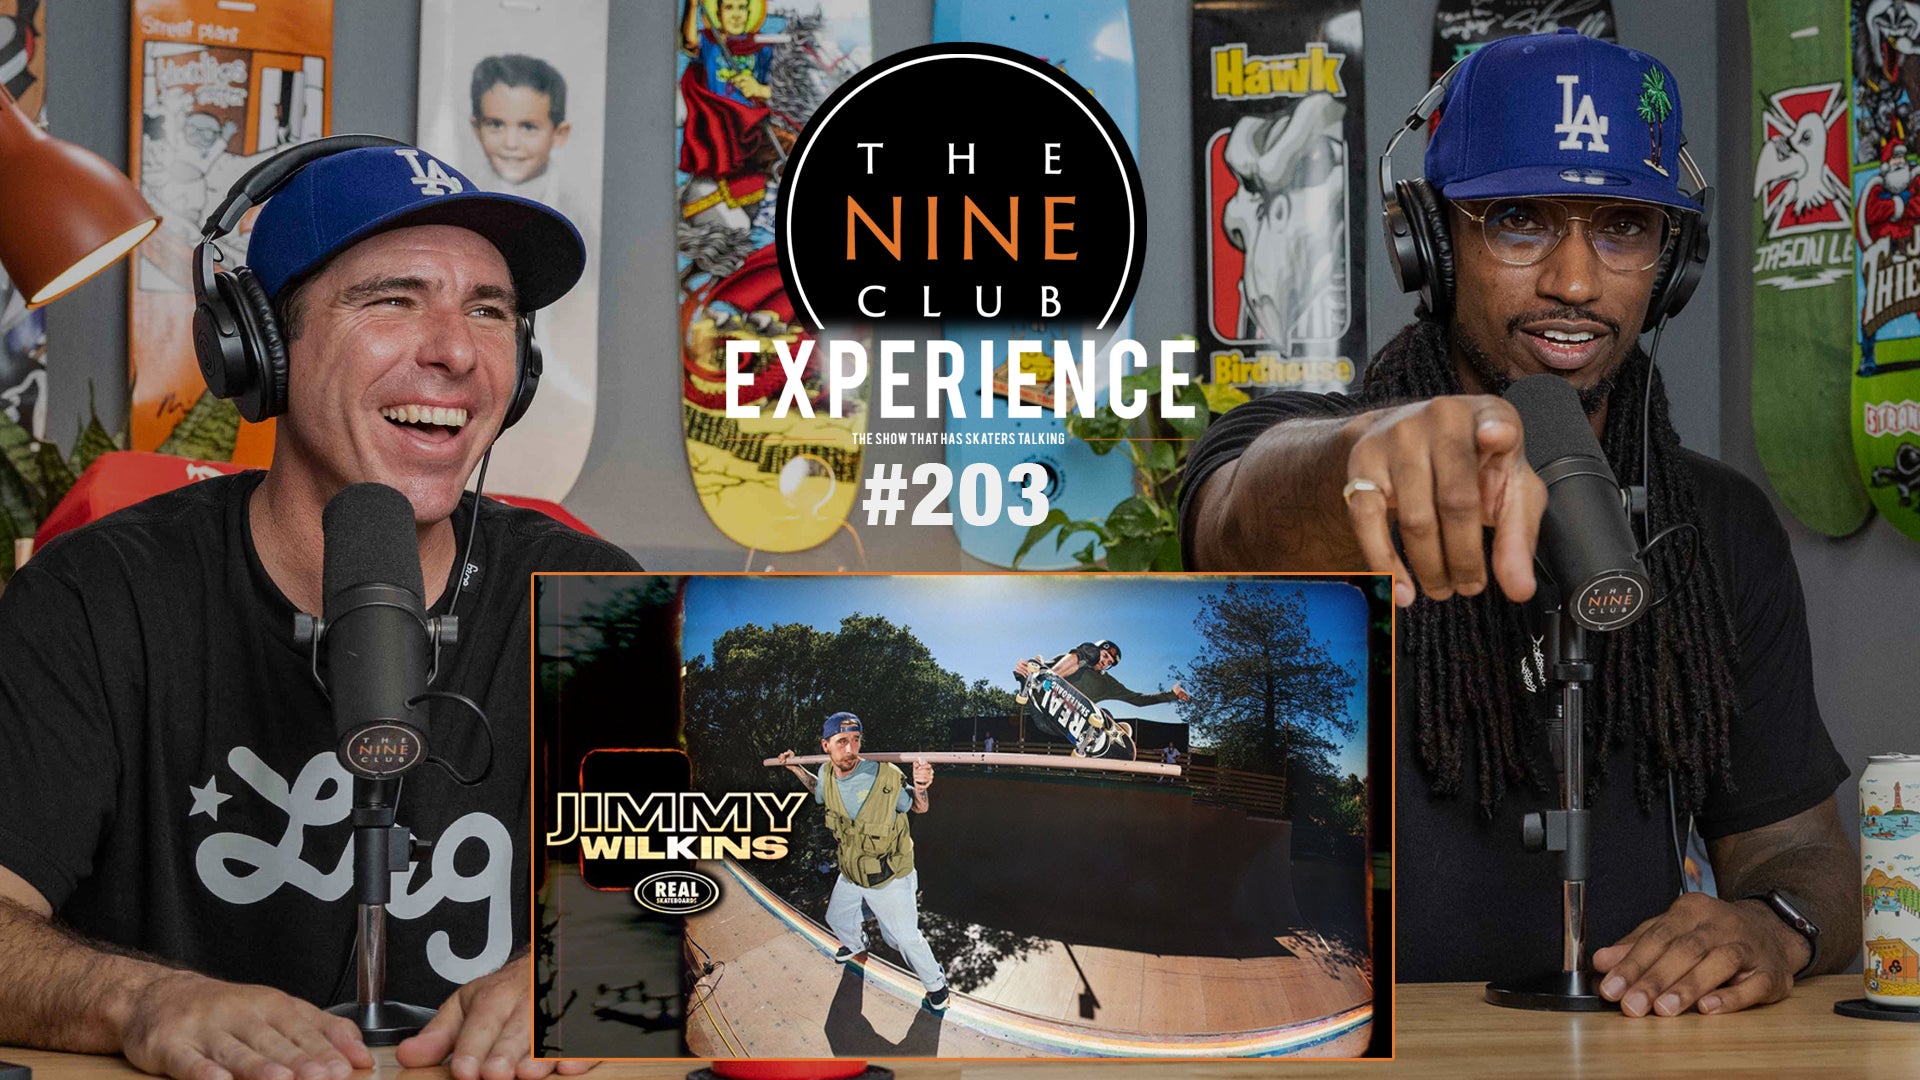 EXPERIENCE #203 - REAL Welcomes Jimmy Wilkins, How To Reset If You’re Having A Bad Session